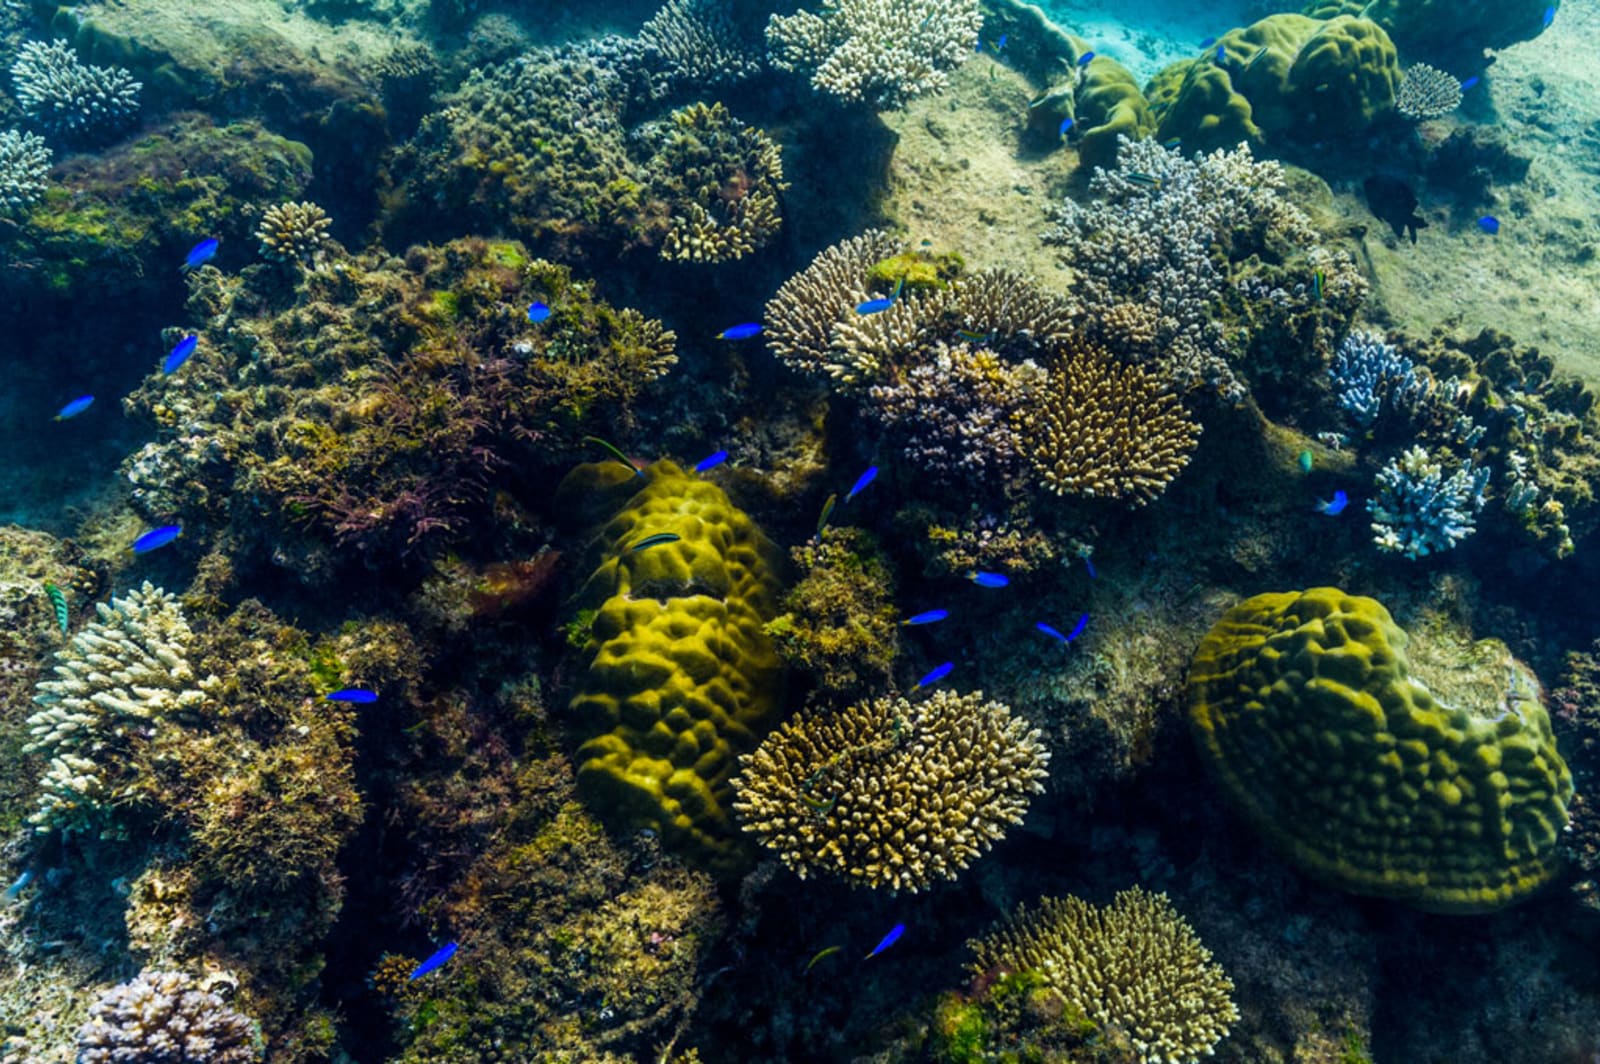 A shoal of blue reef fish swimming over a coral garden on a reef